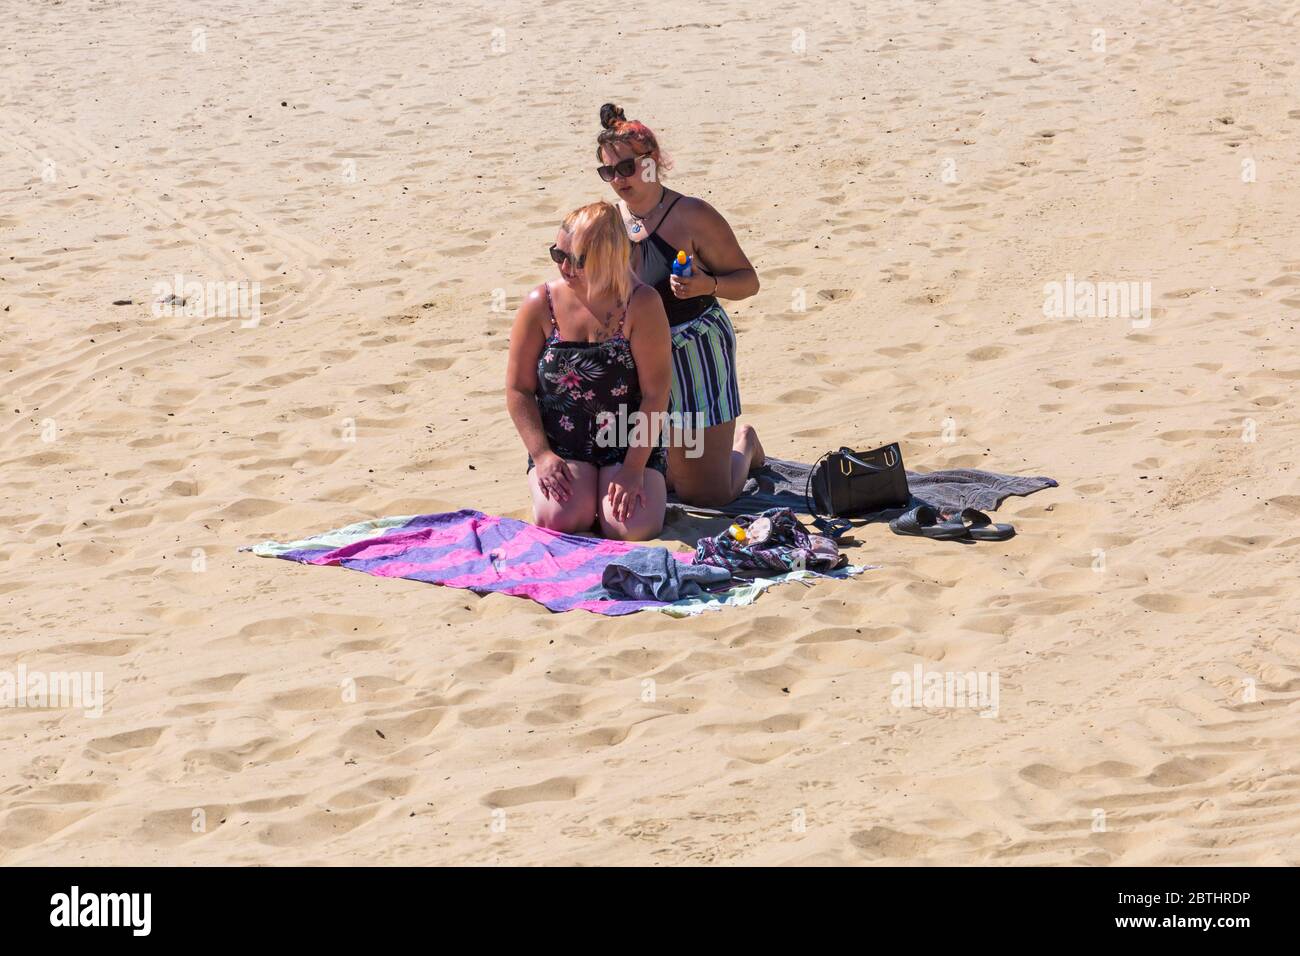 Bournemouth, Dorset UK. 26th May 2020. UK weather: another hot sunny day at Bournemouth beaches with clear blue skies and unbroken sunshine, as the glorious weather continues and temperatures rise. Sunseekers head to the seaside to enjoy the sunshine. Slapping on the suncream. Credit: Carolyn Jenkins/Alamy Live News Stock Photo